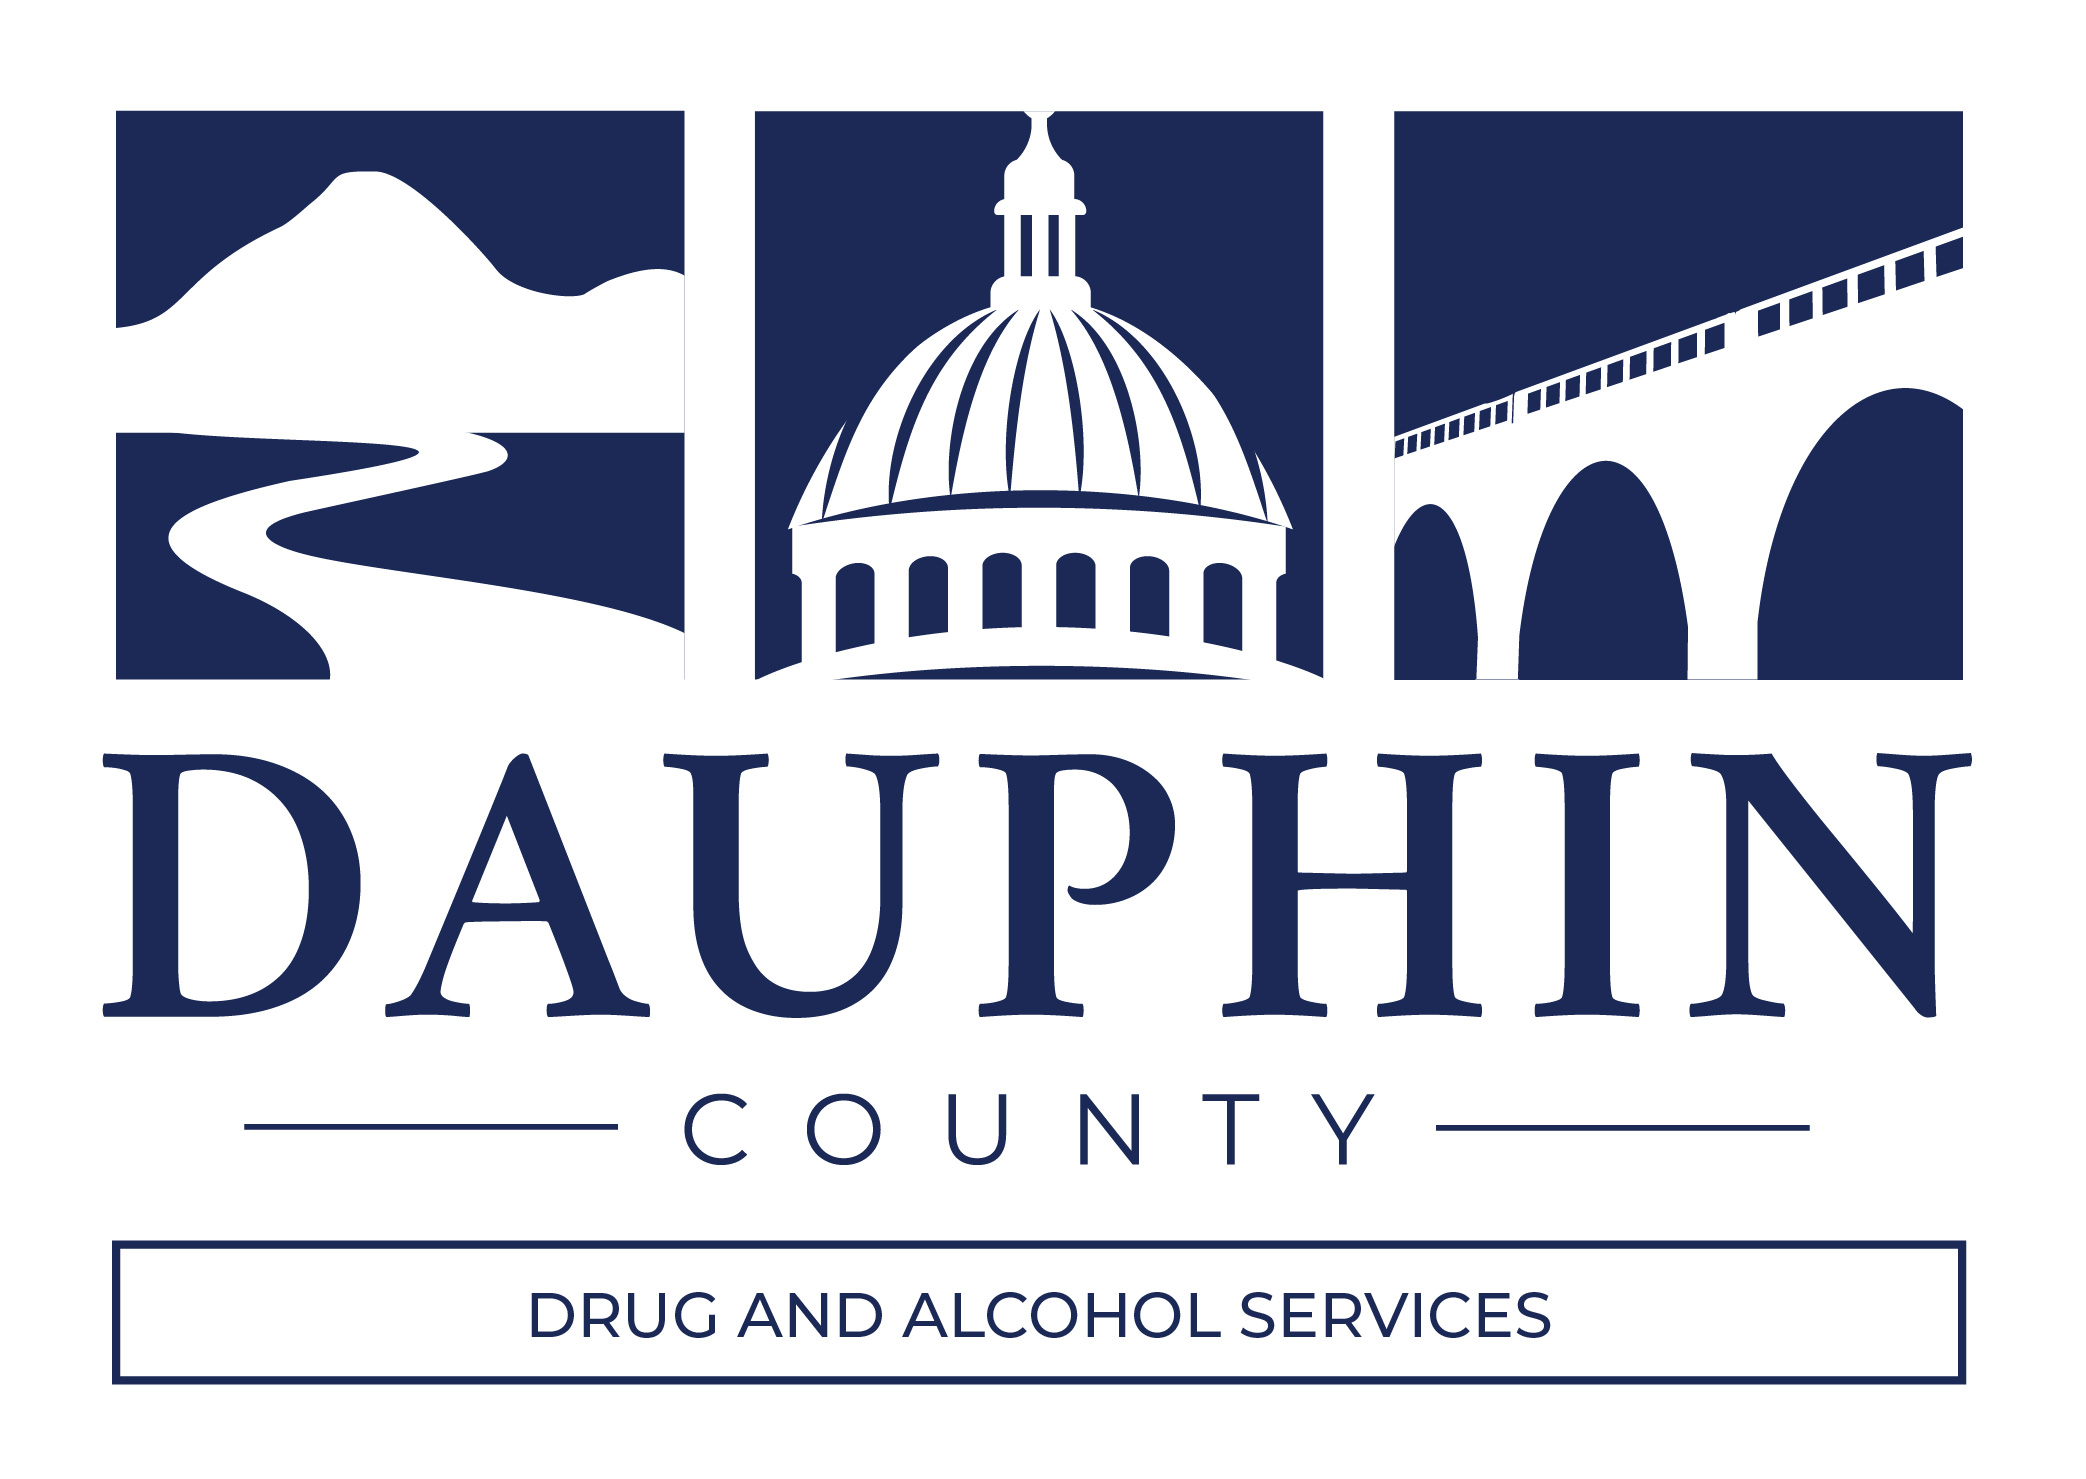 Dauphin County Drug And Alcohol Services Logo